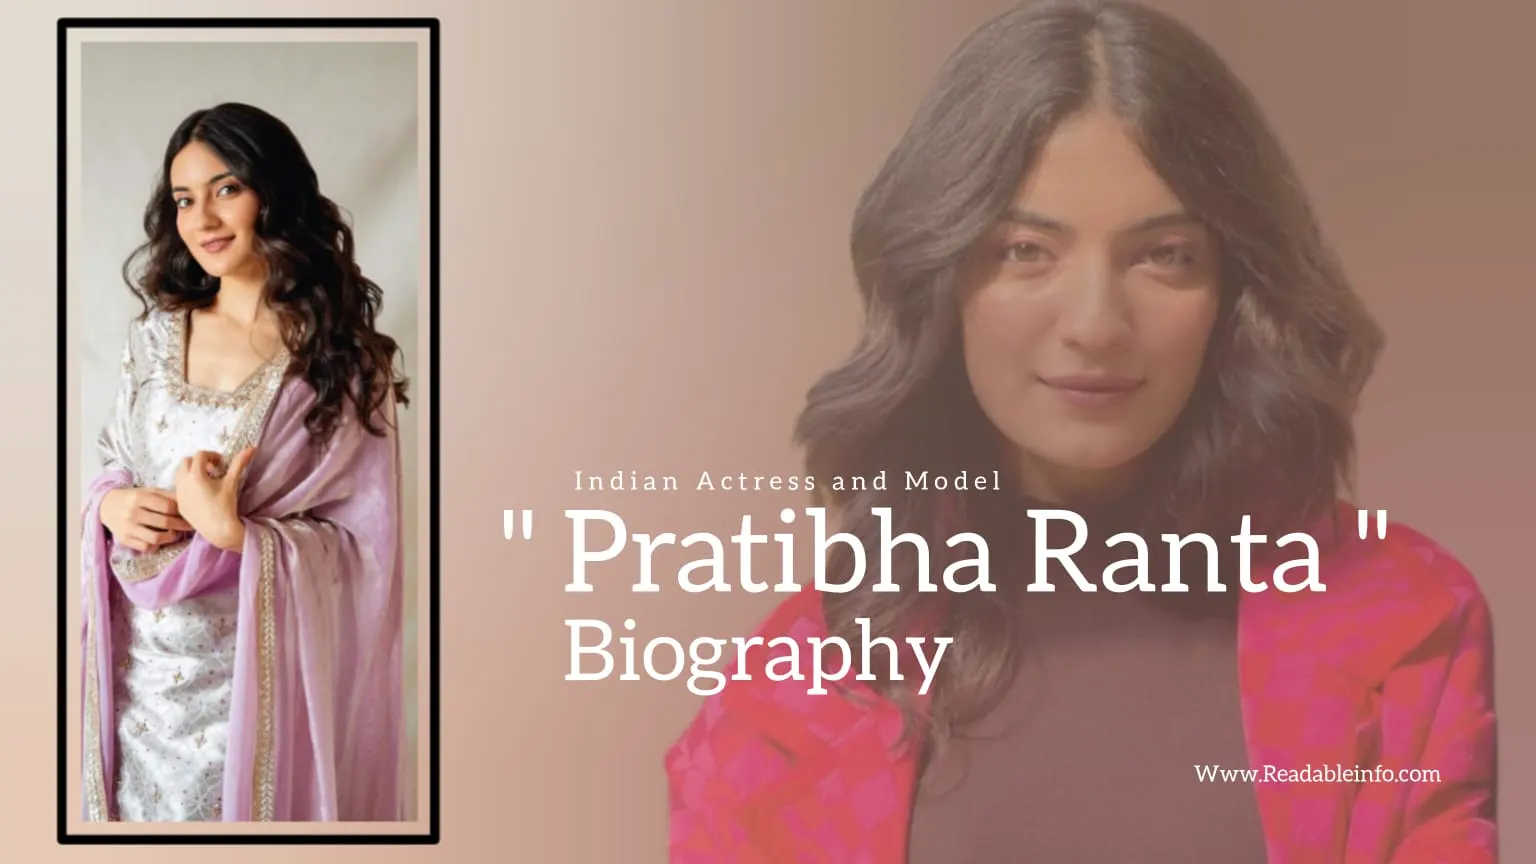 You are currently viewing Pratibha Ranta Biography (Indian Actress and Model)